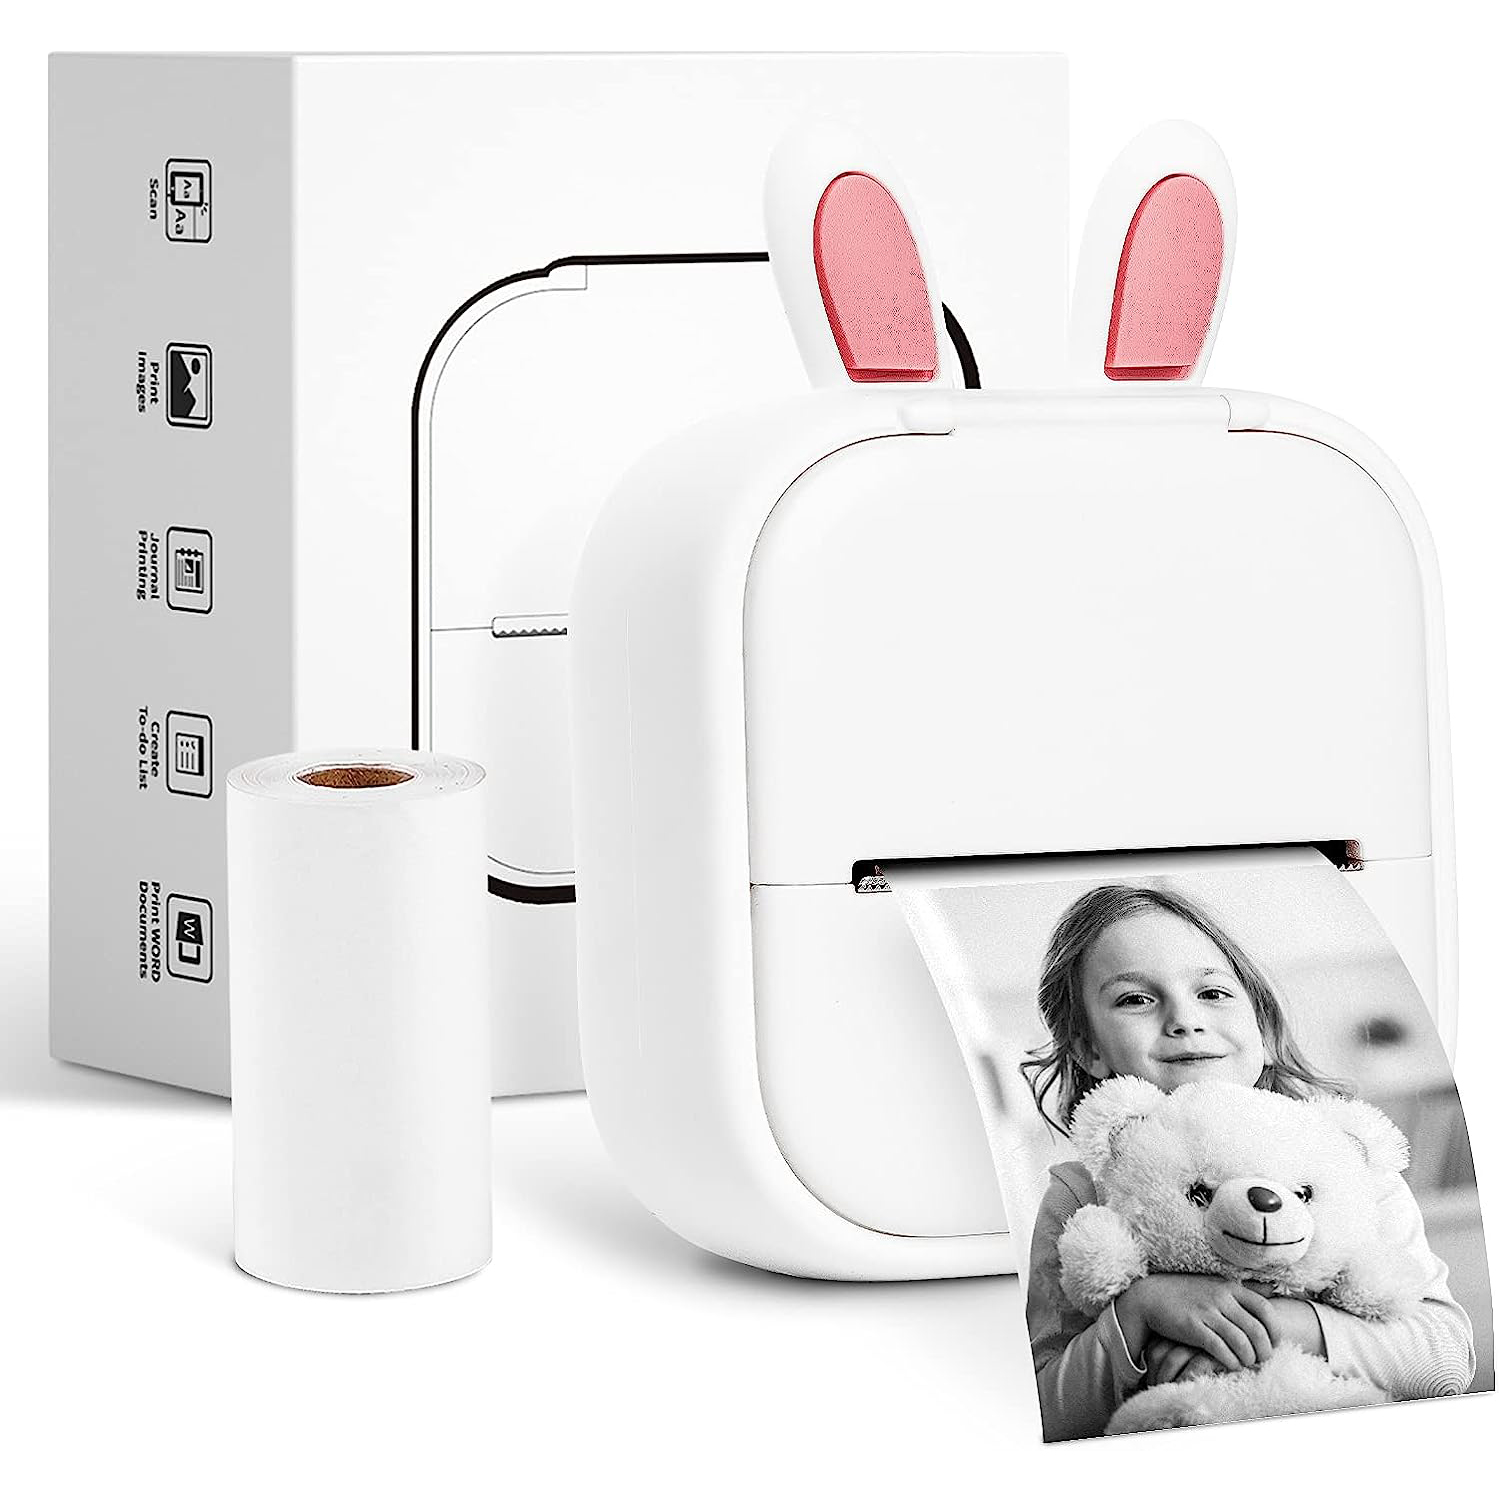 Mini Portable Sticker Printer - Phomemo T02 Pocket Printer with Roll Paper,  Bluetooth Photo Picture Printer for Children Birthday, Compatible with  Phone & Tablet